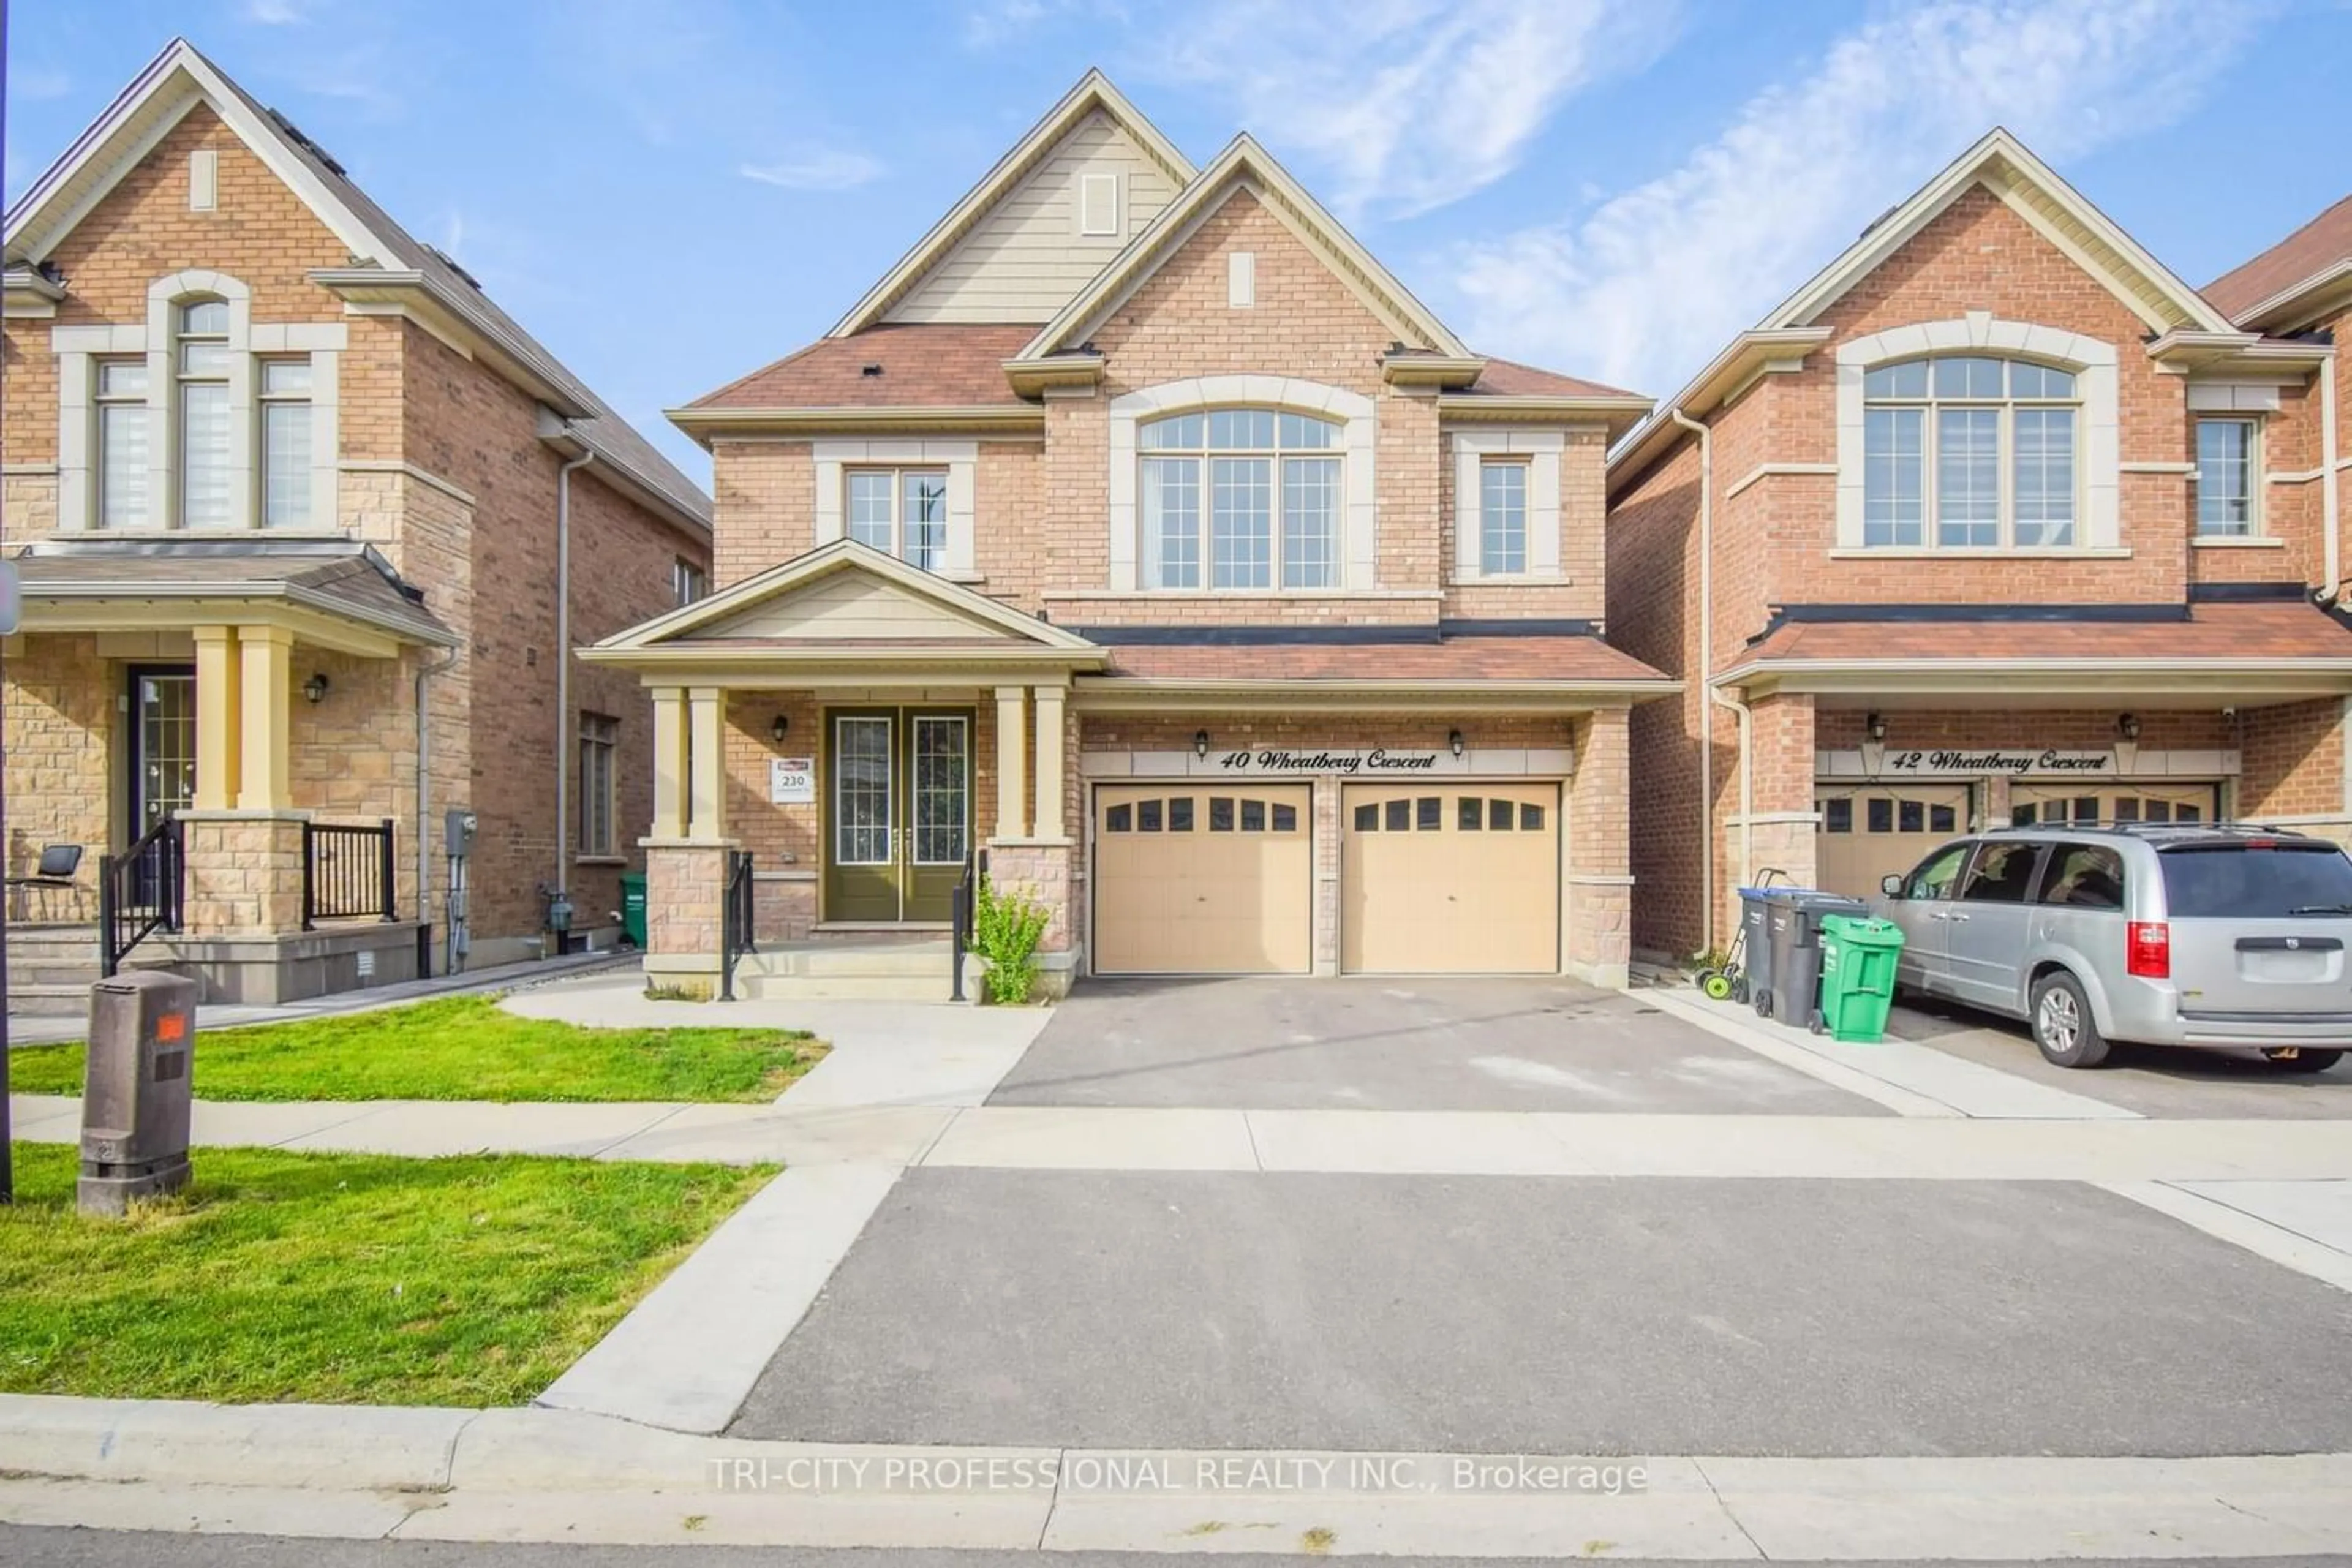 Home with brick exterior material for 40 Wheatberry Cres, Brampton Ontario L6R 4A1